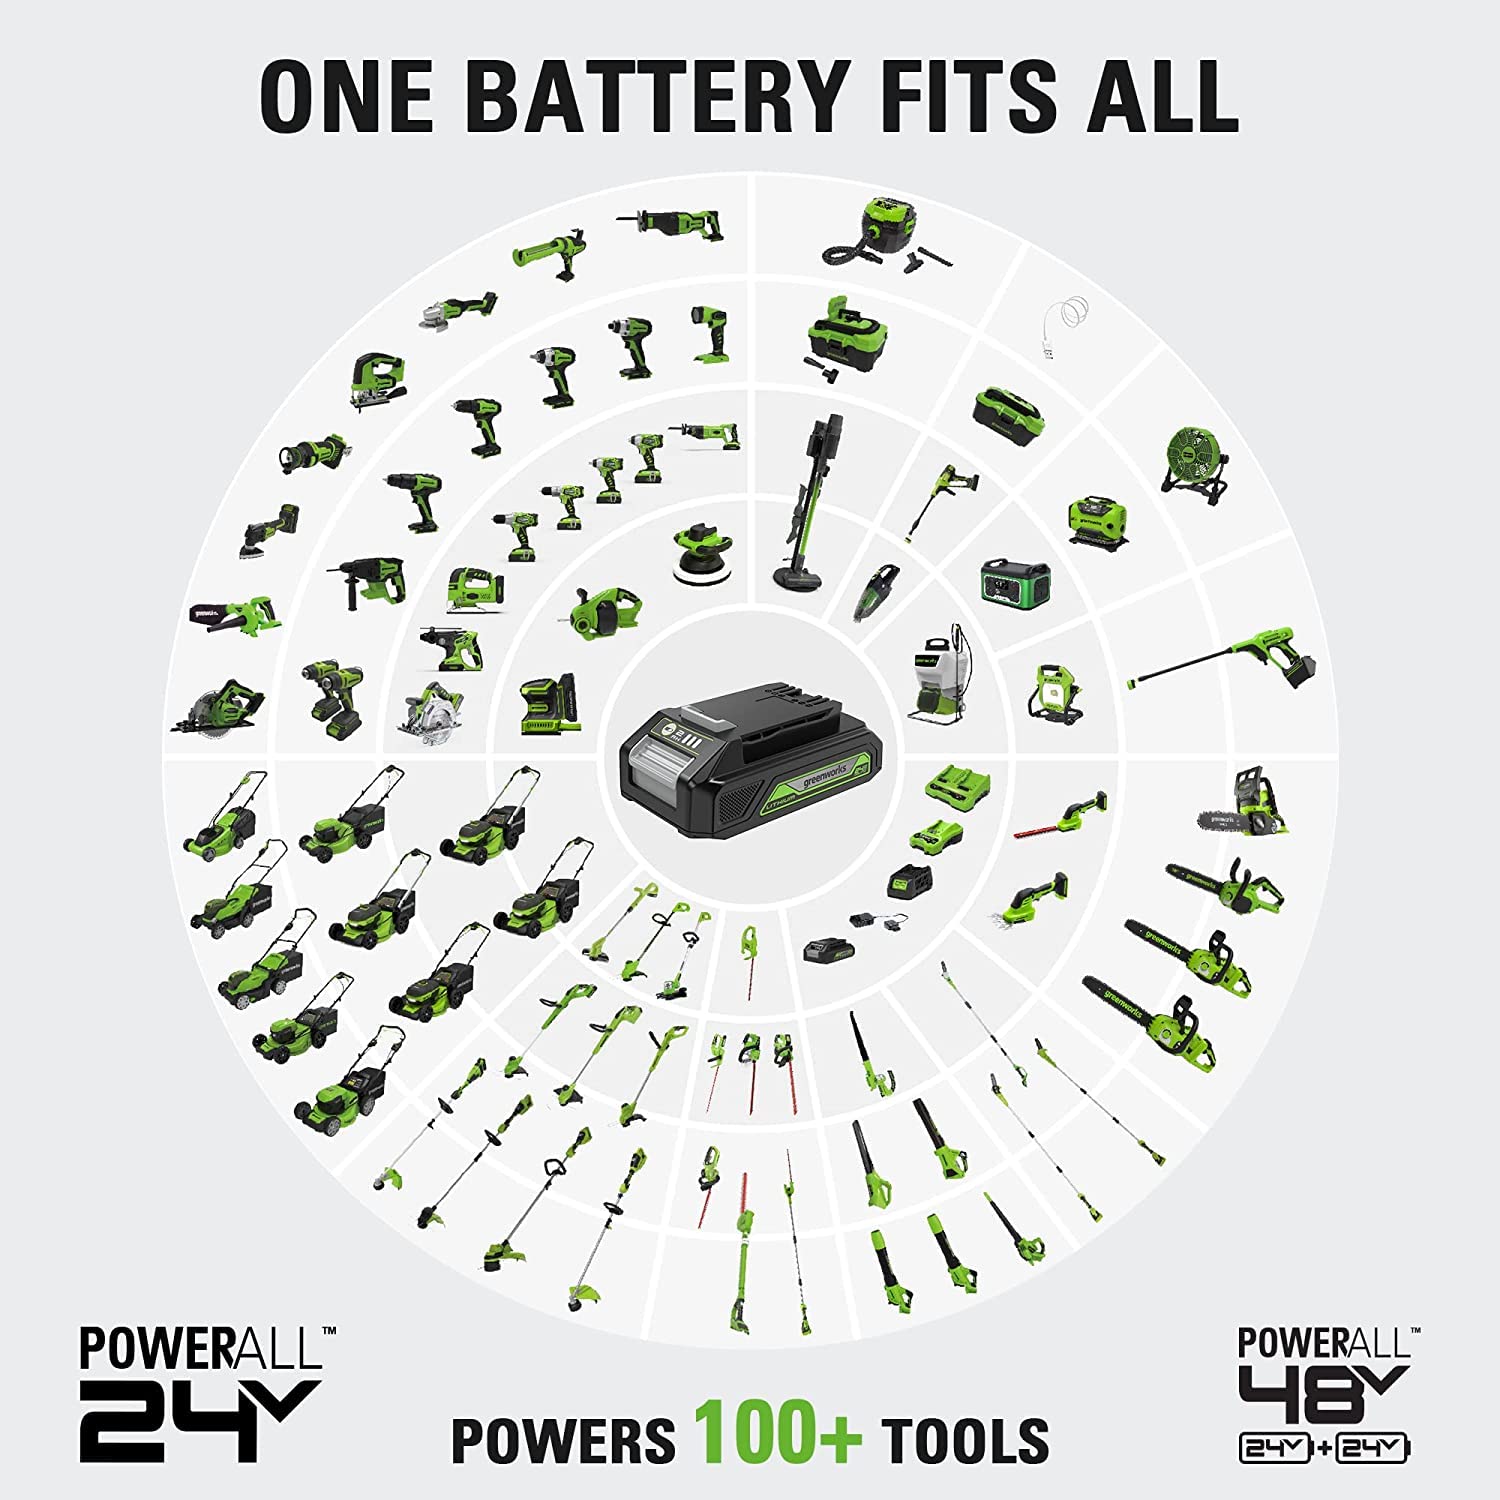 Greenworks 24V Brushless Drill/Driver + Impact Drive Combo Kit, Batteries and Charger Included, with 60-Piece Multi-Material Drill + Drive Bit Set